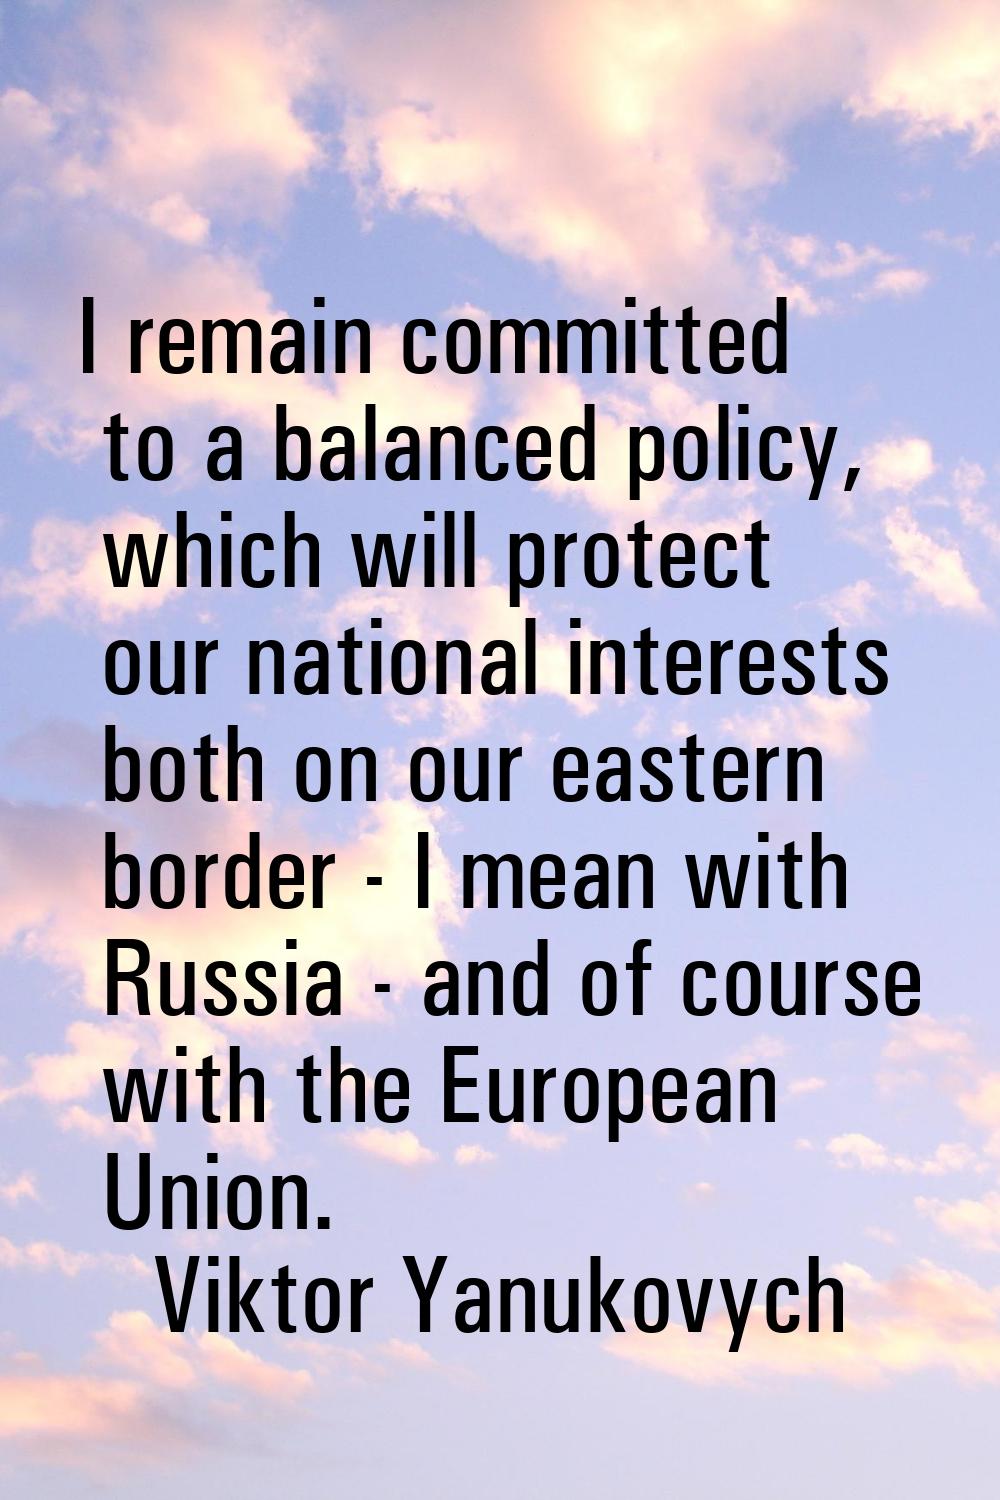 I remain committed to a balanced policy, which will protect our national interests both on our east